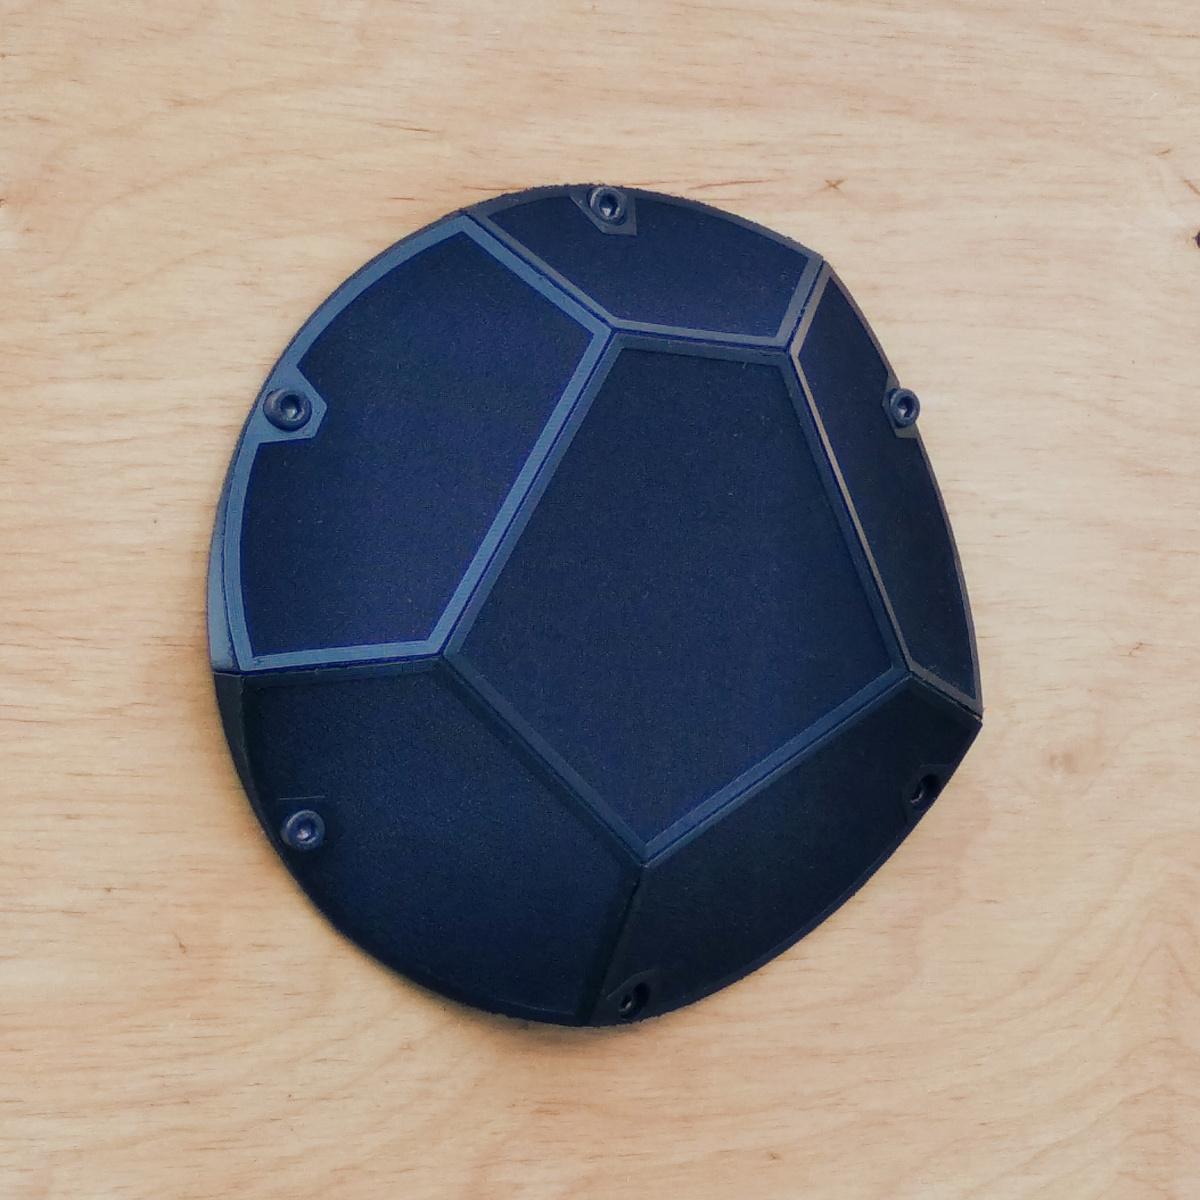 #3DPNSpeakerCover Print on fabric - Fold in place 3d model